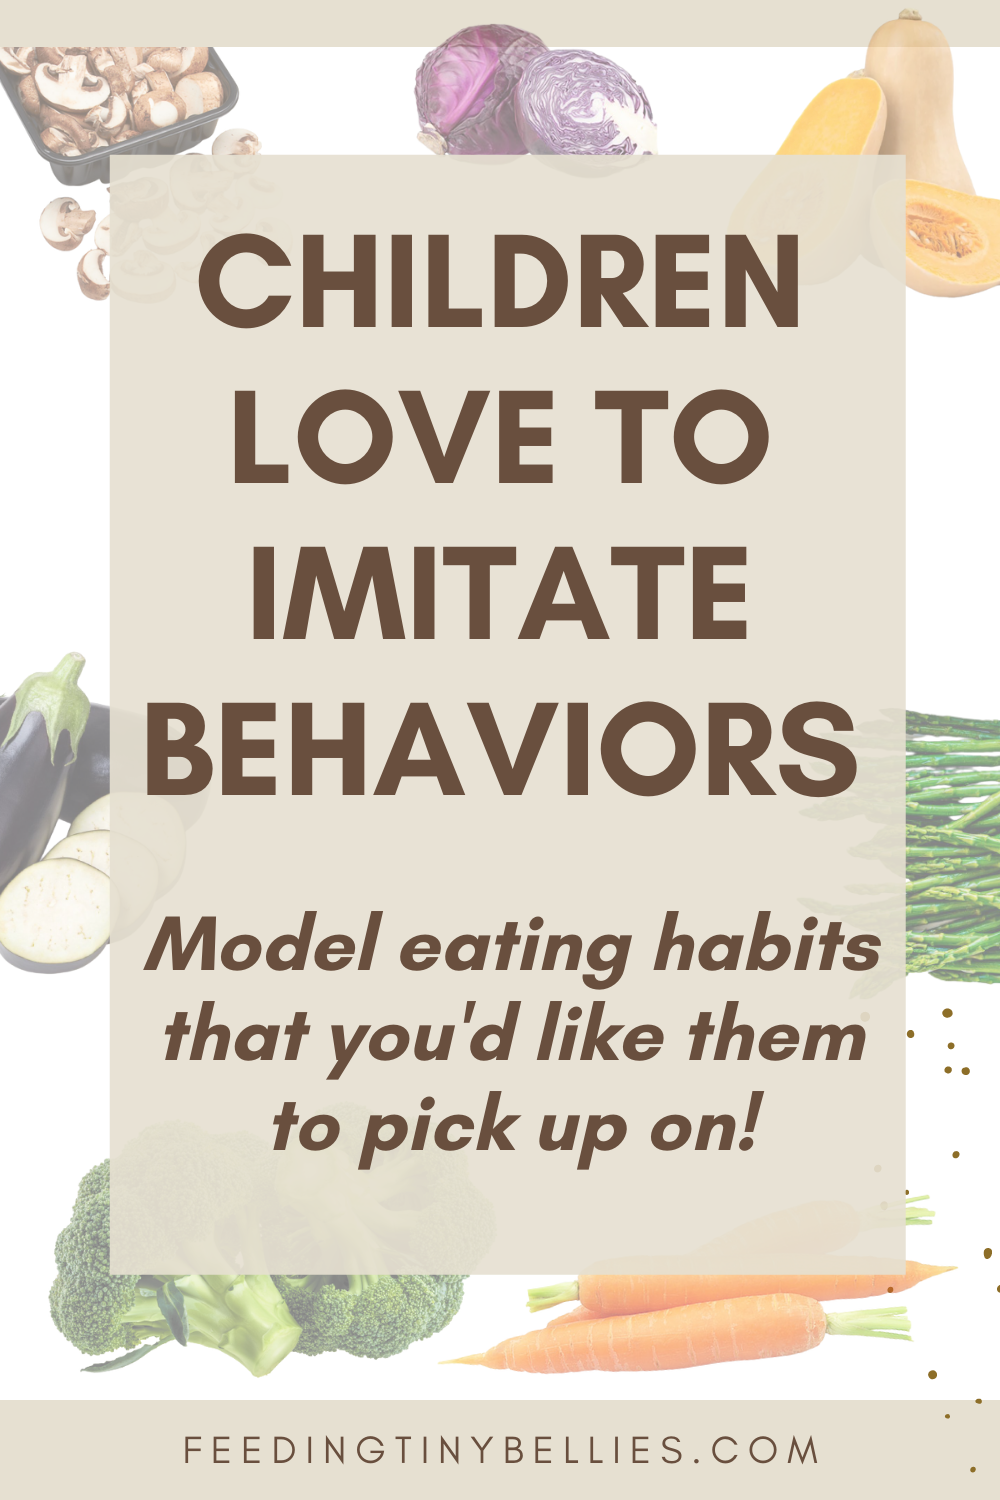 Children love to imitate behaviors. Model eating habits that you'd like them to pick up on!